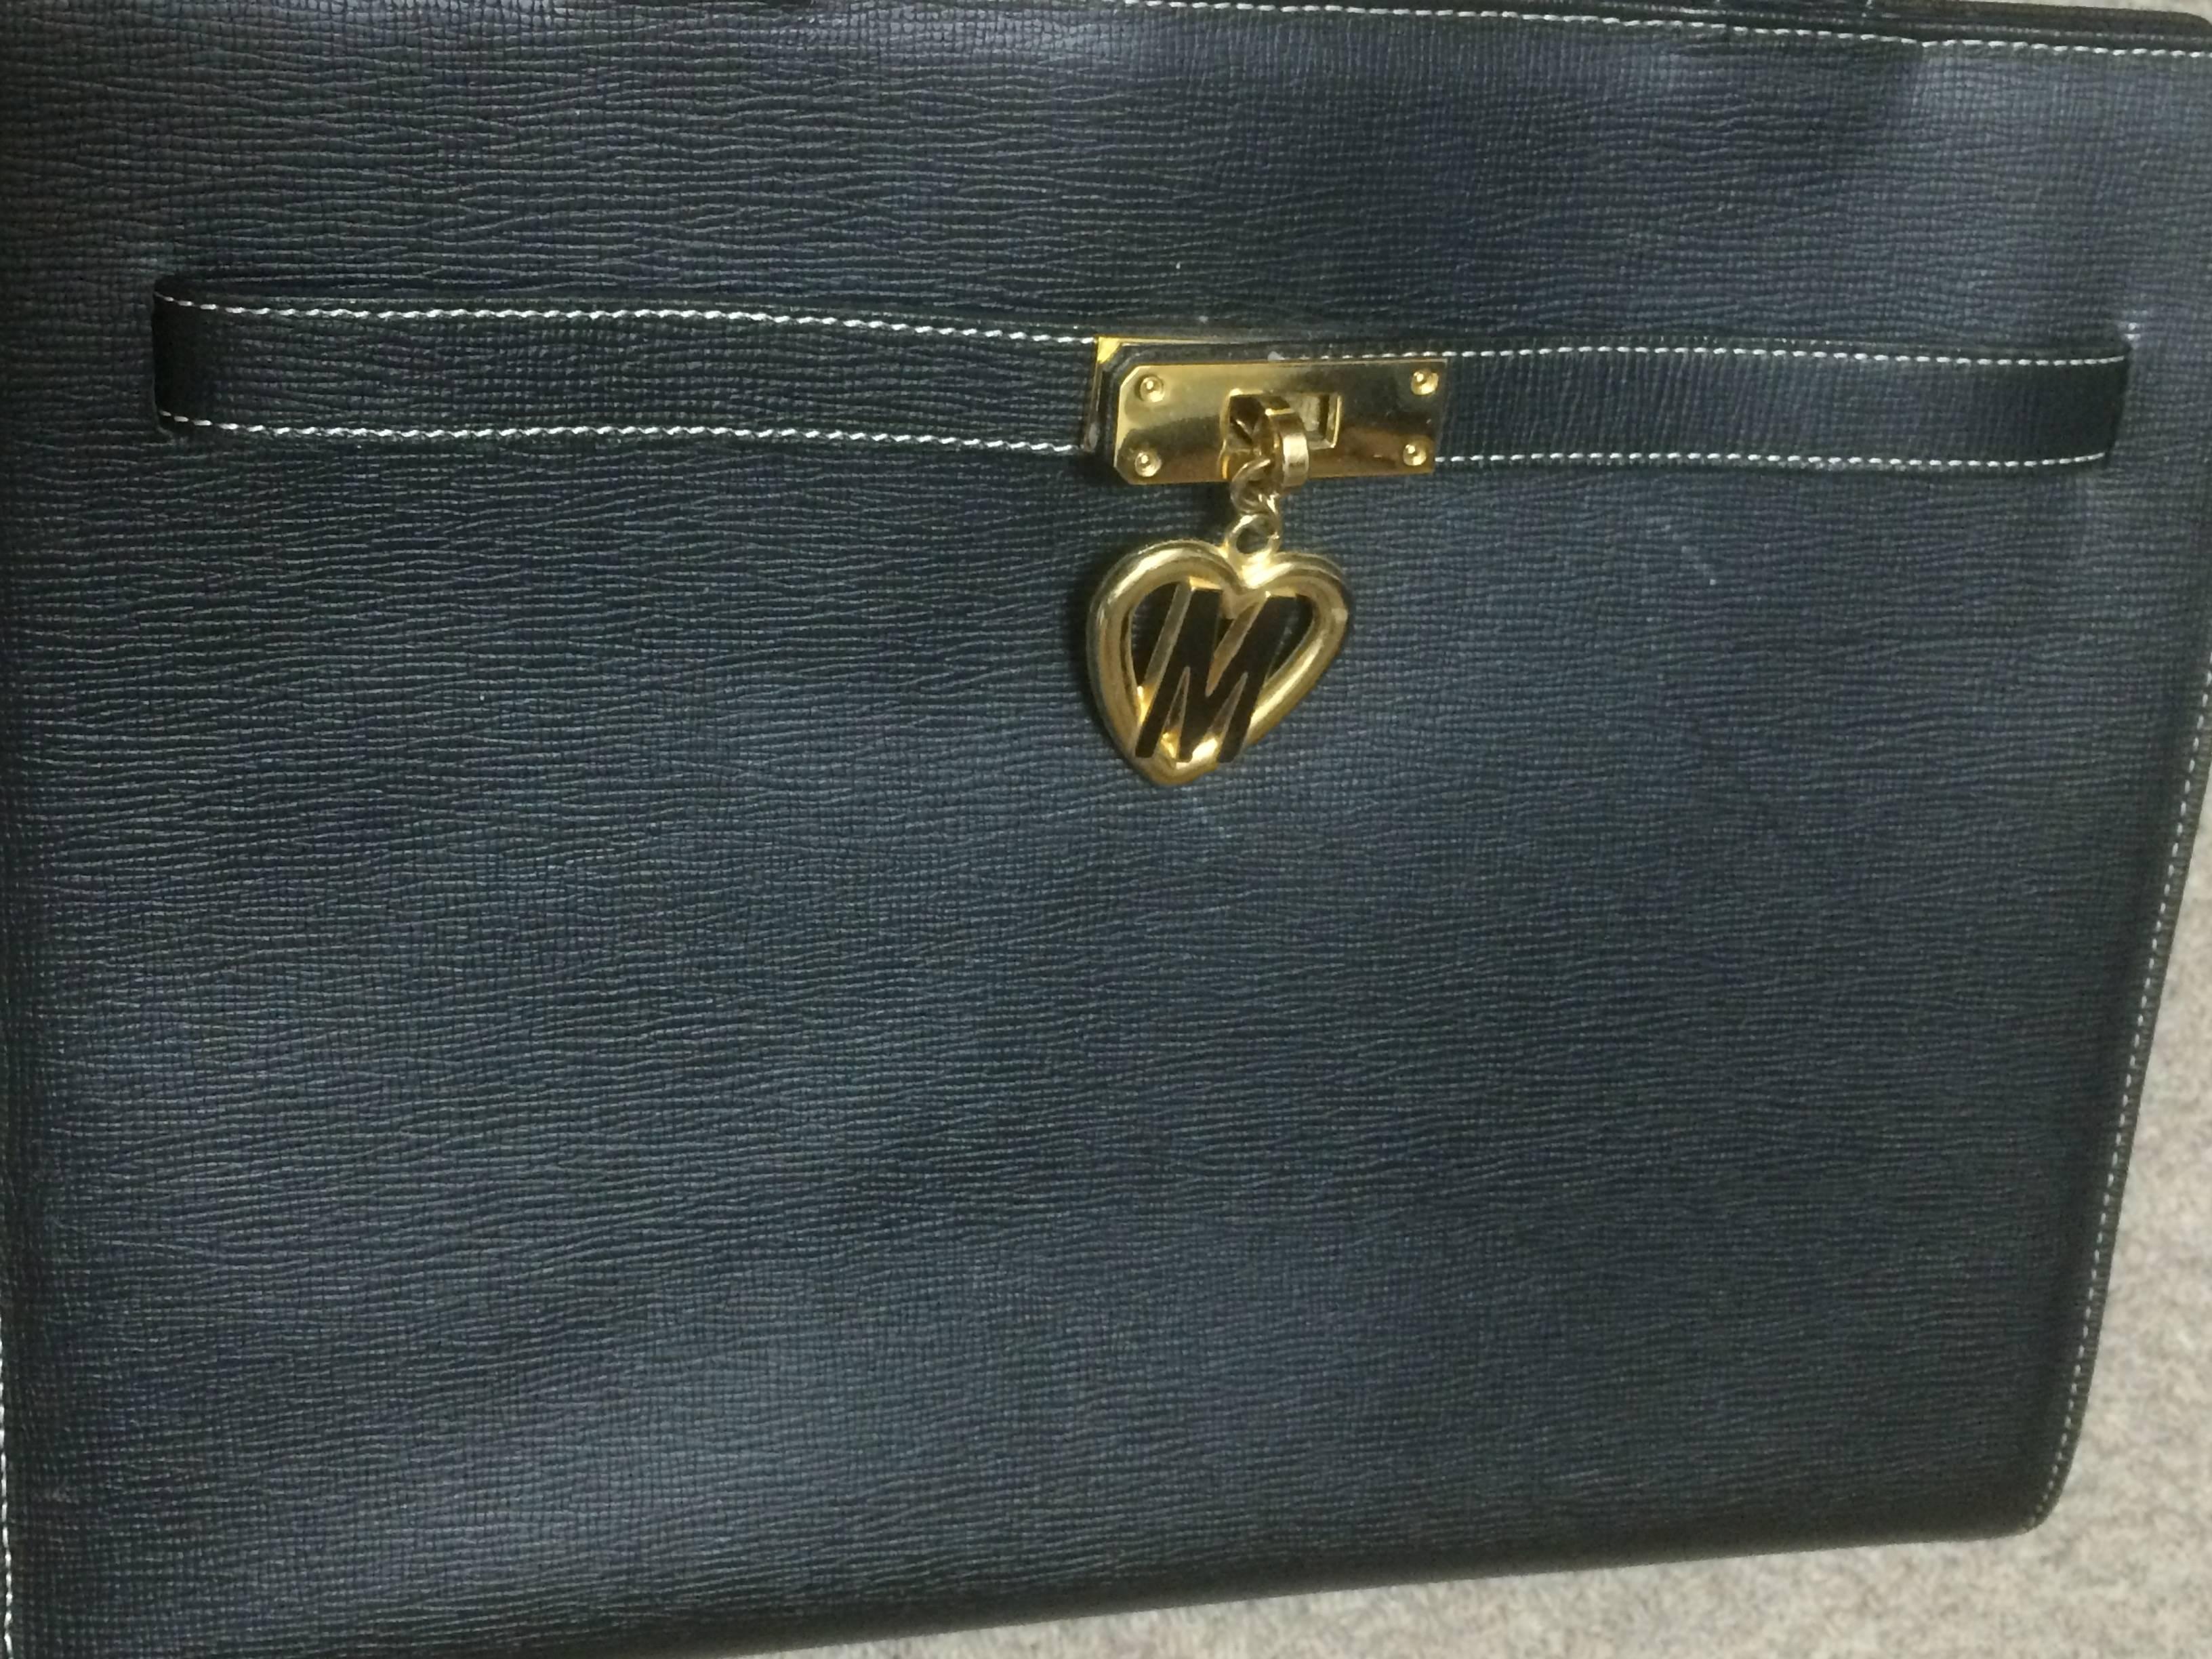 1990s. Vintage MOSCHINO black leather tote bag in Kelly purse style with iconic M and heart charm.

This classic kelly style tote bag from MOSCHINO would never go out of style.
Featuring th 